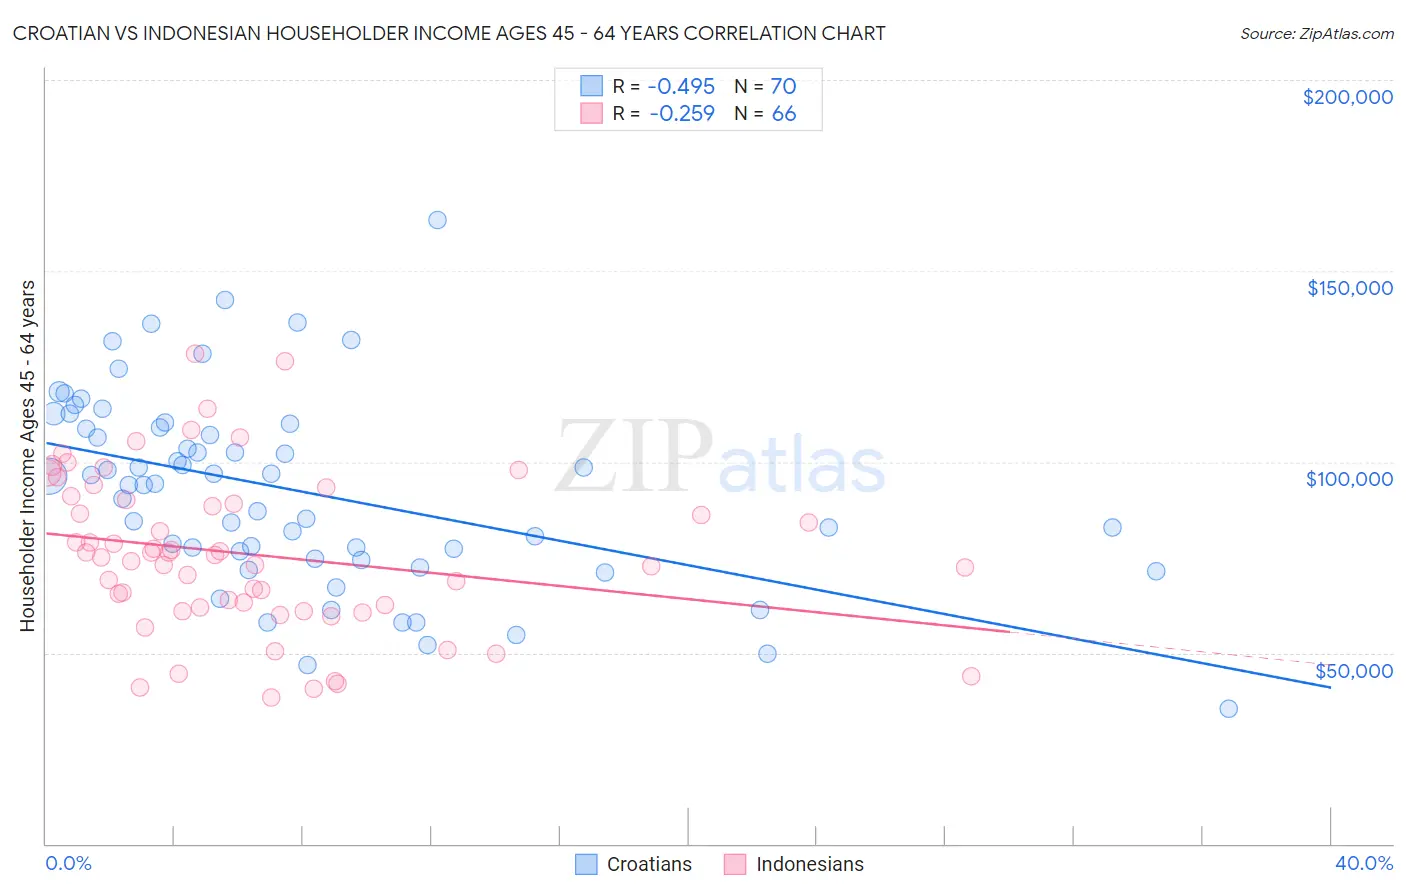 Croatian vs Indonesian Householder Income Ages 45 - 64 years